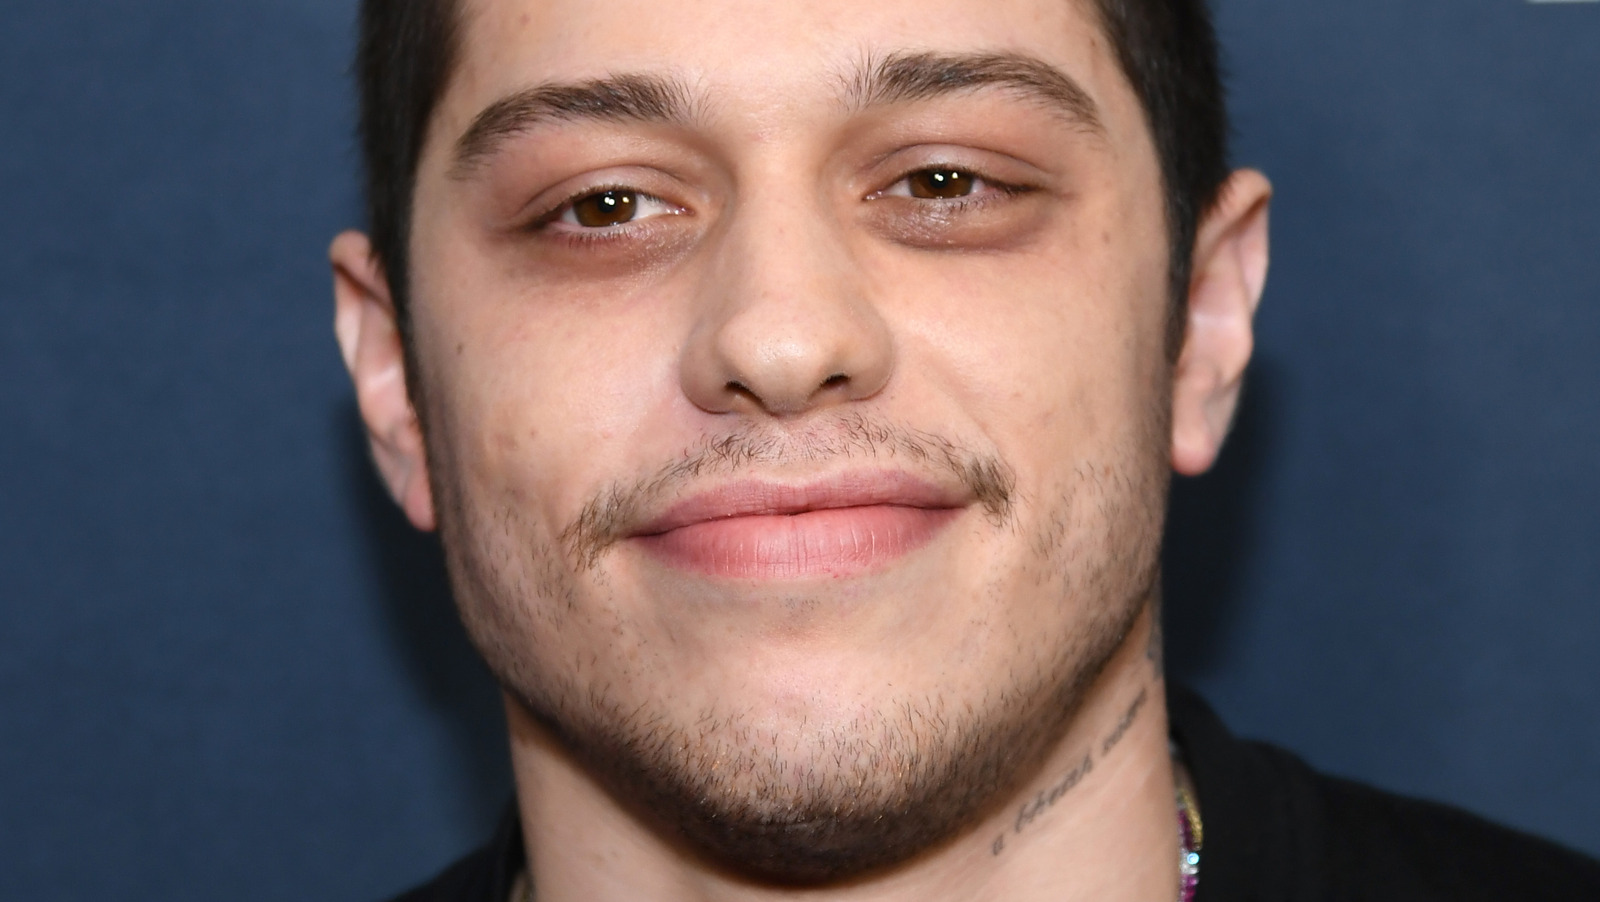 Pete Davidson and Emily Ratajkowski make their first public appearance since sparking dating rumors